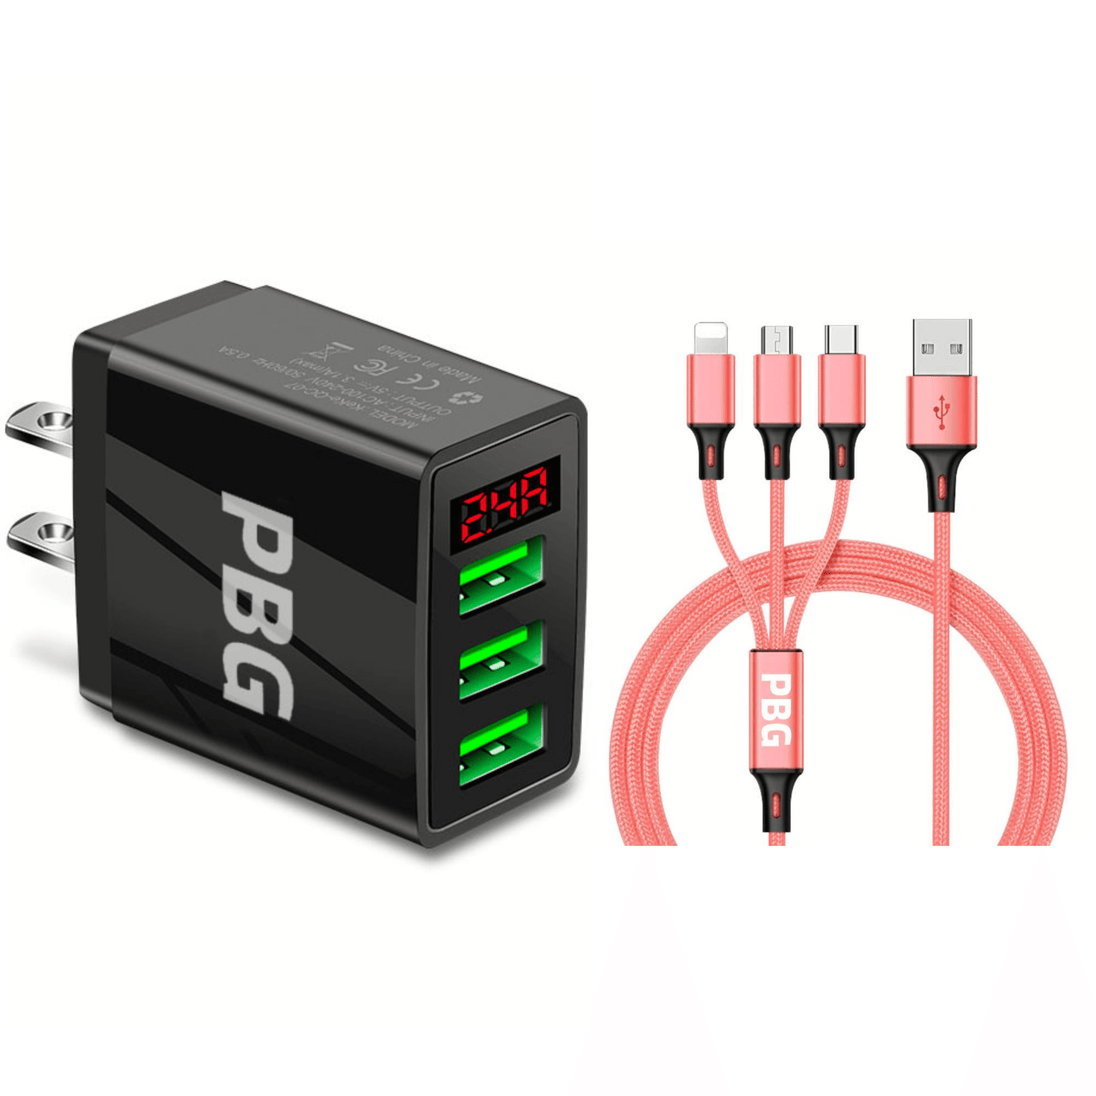 3 port LED Display Wall Charger  and 3 in 1 Cable Bundle Pink - PremiumBrandGoods